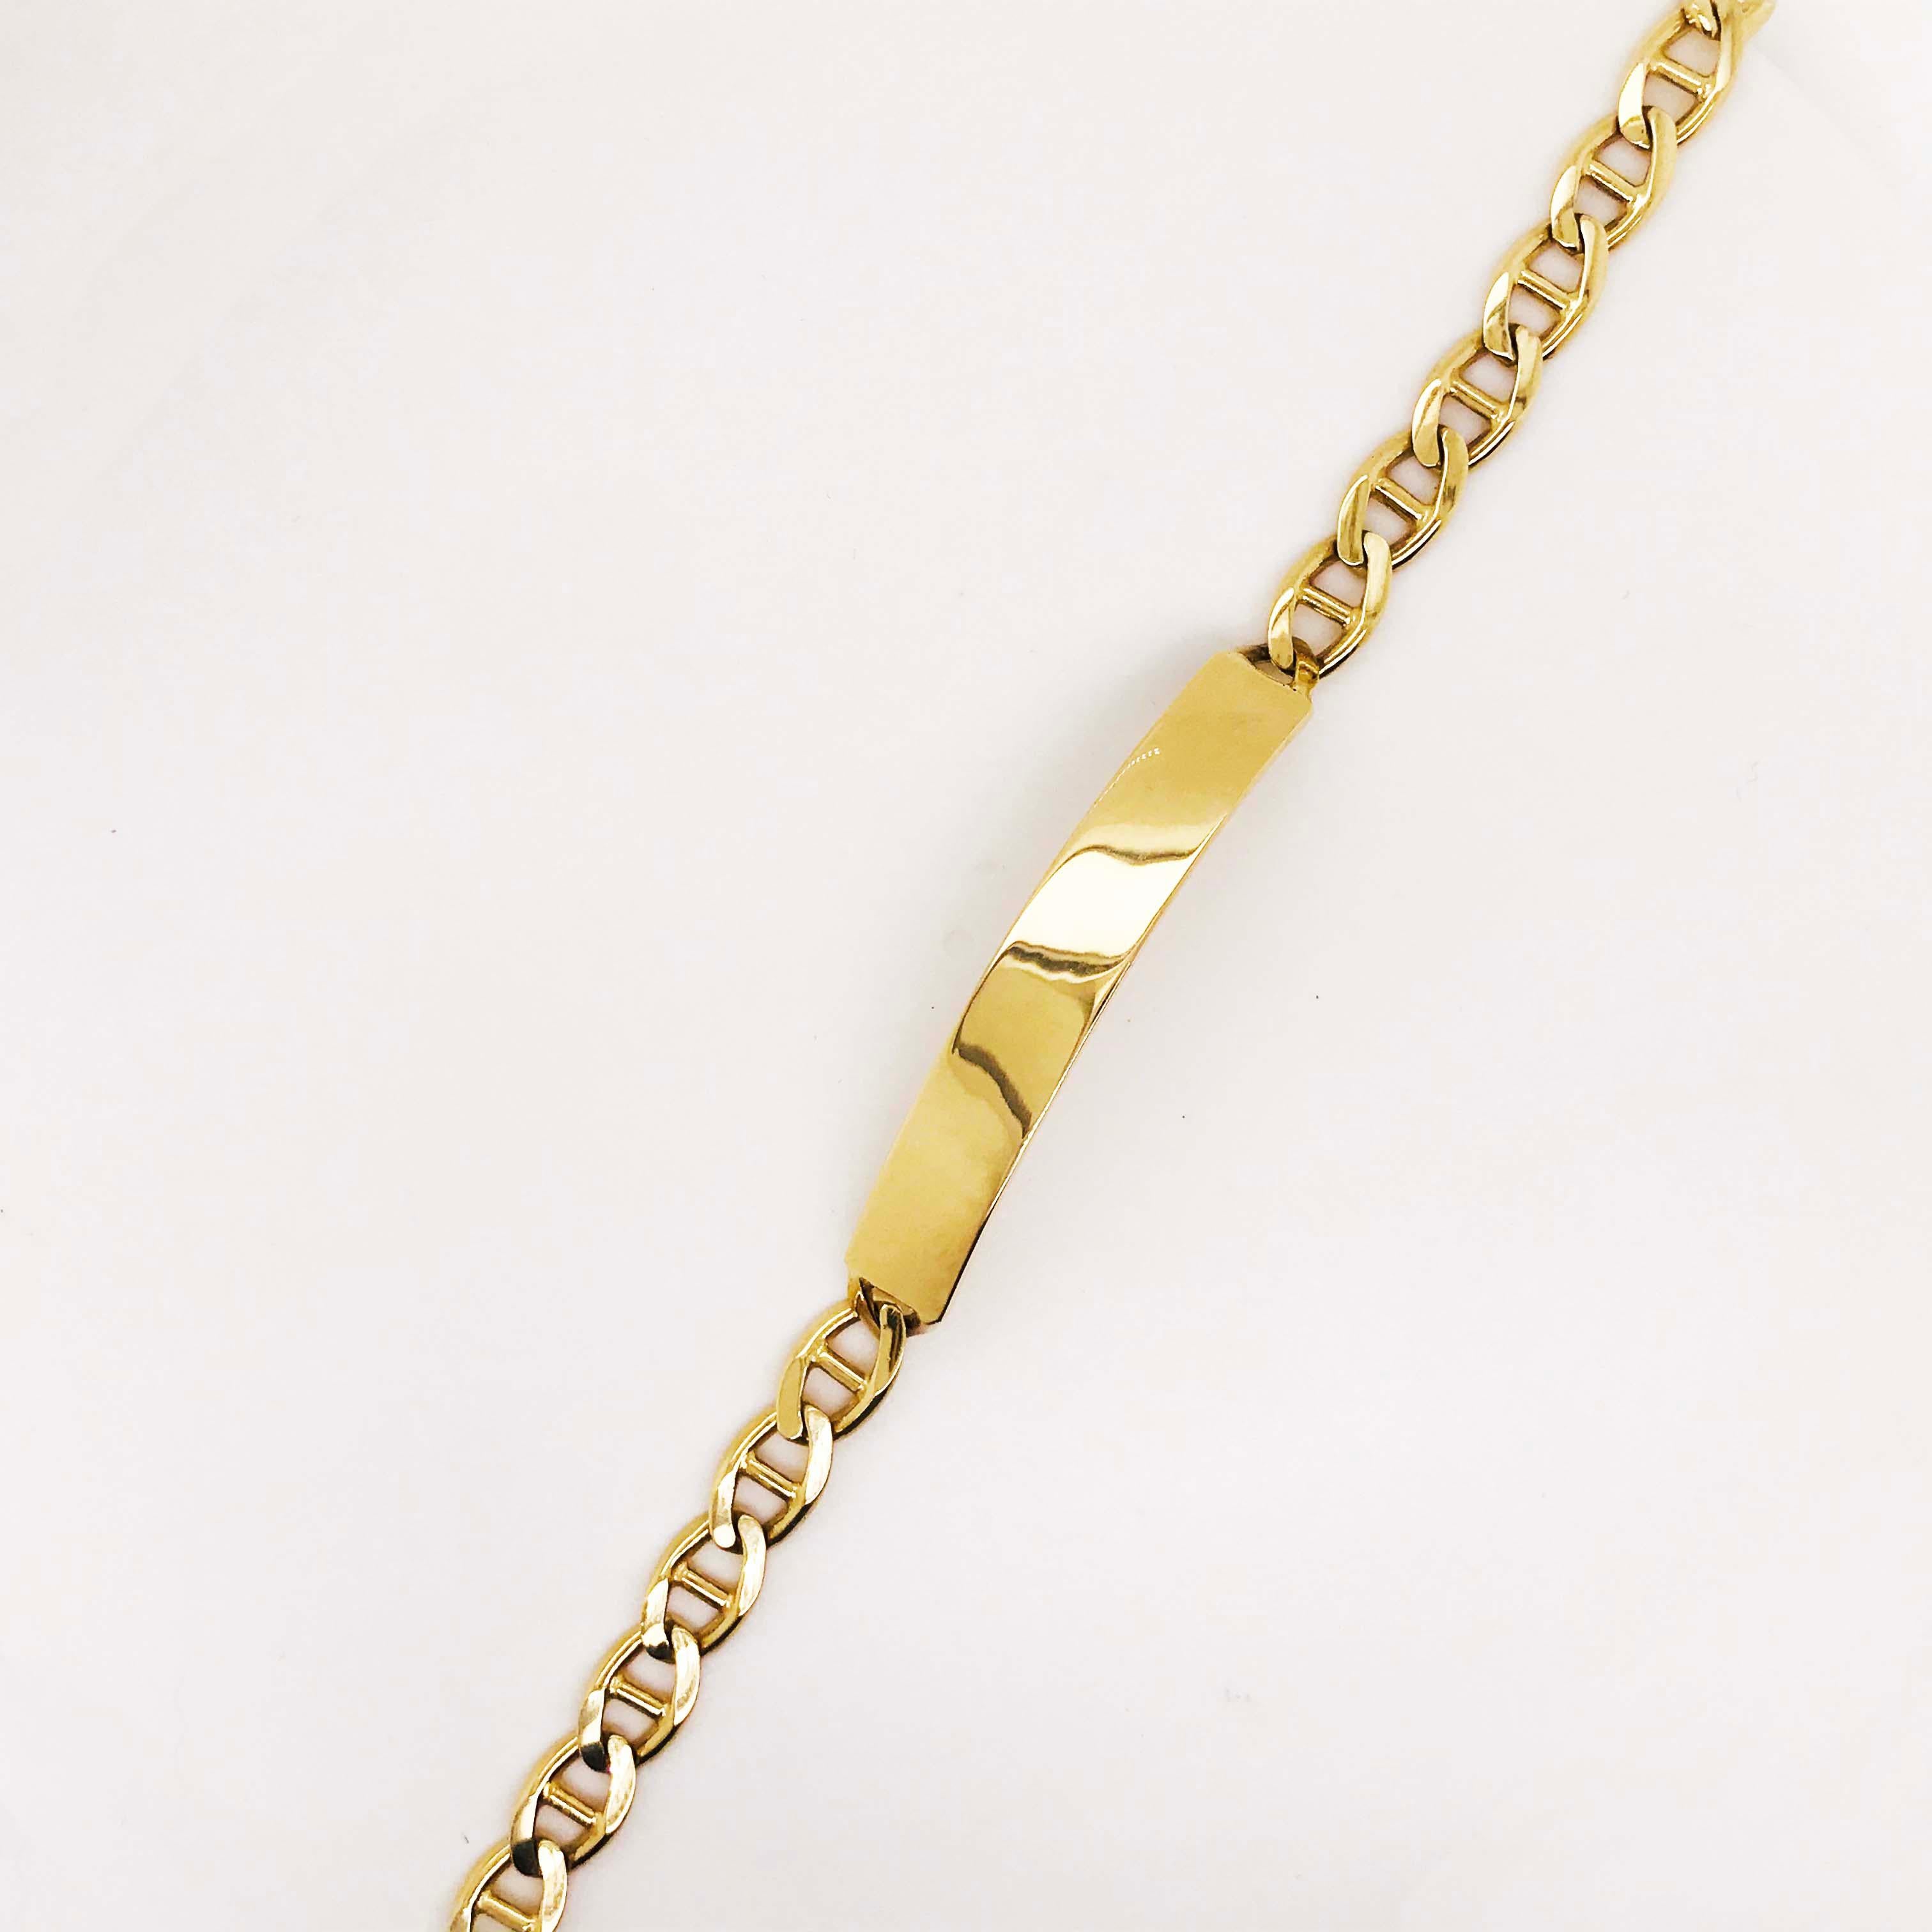 Engravable ID Bracelet in 14 kt Gold with Anchor Link Chain for Men or LG Woman 2